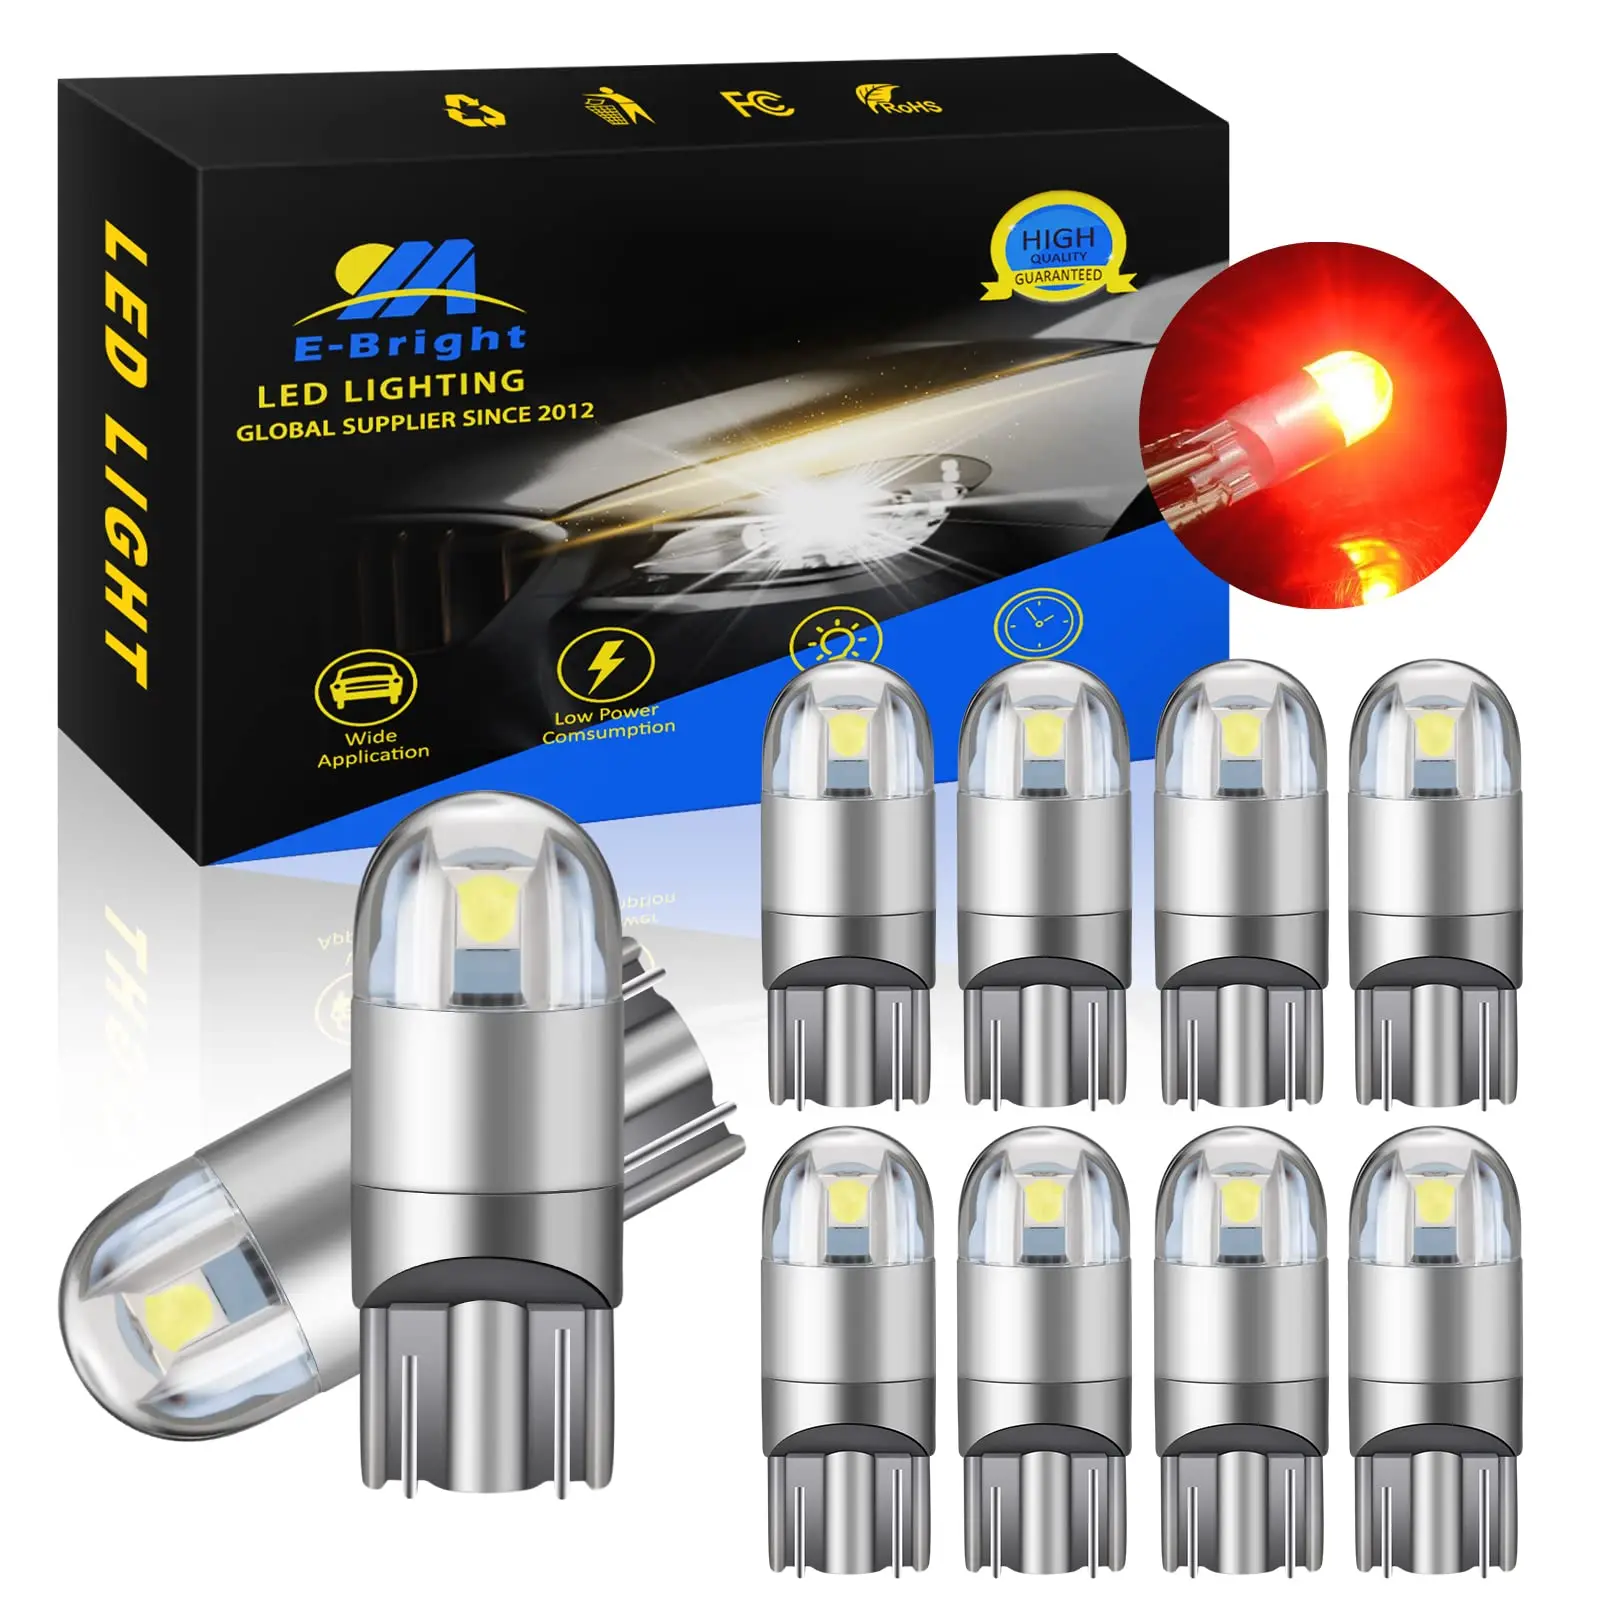 

12V Interior 3SMD Car Lights 2825 W5W 912 194 168 T10 Led Bulb for Trunk Dome Map Light Door Courtesy License Plate